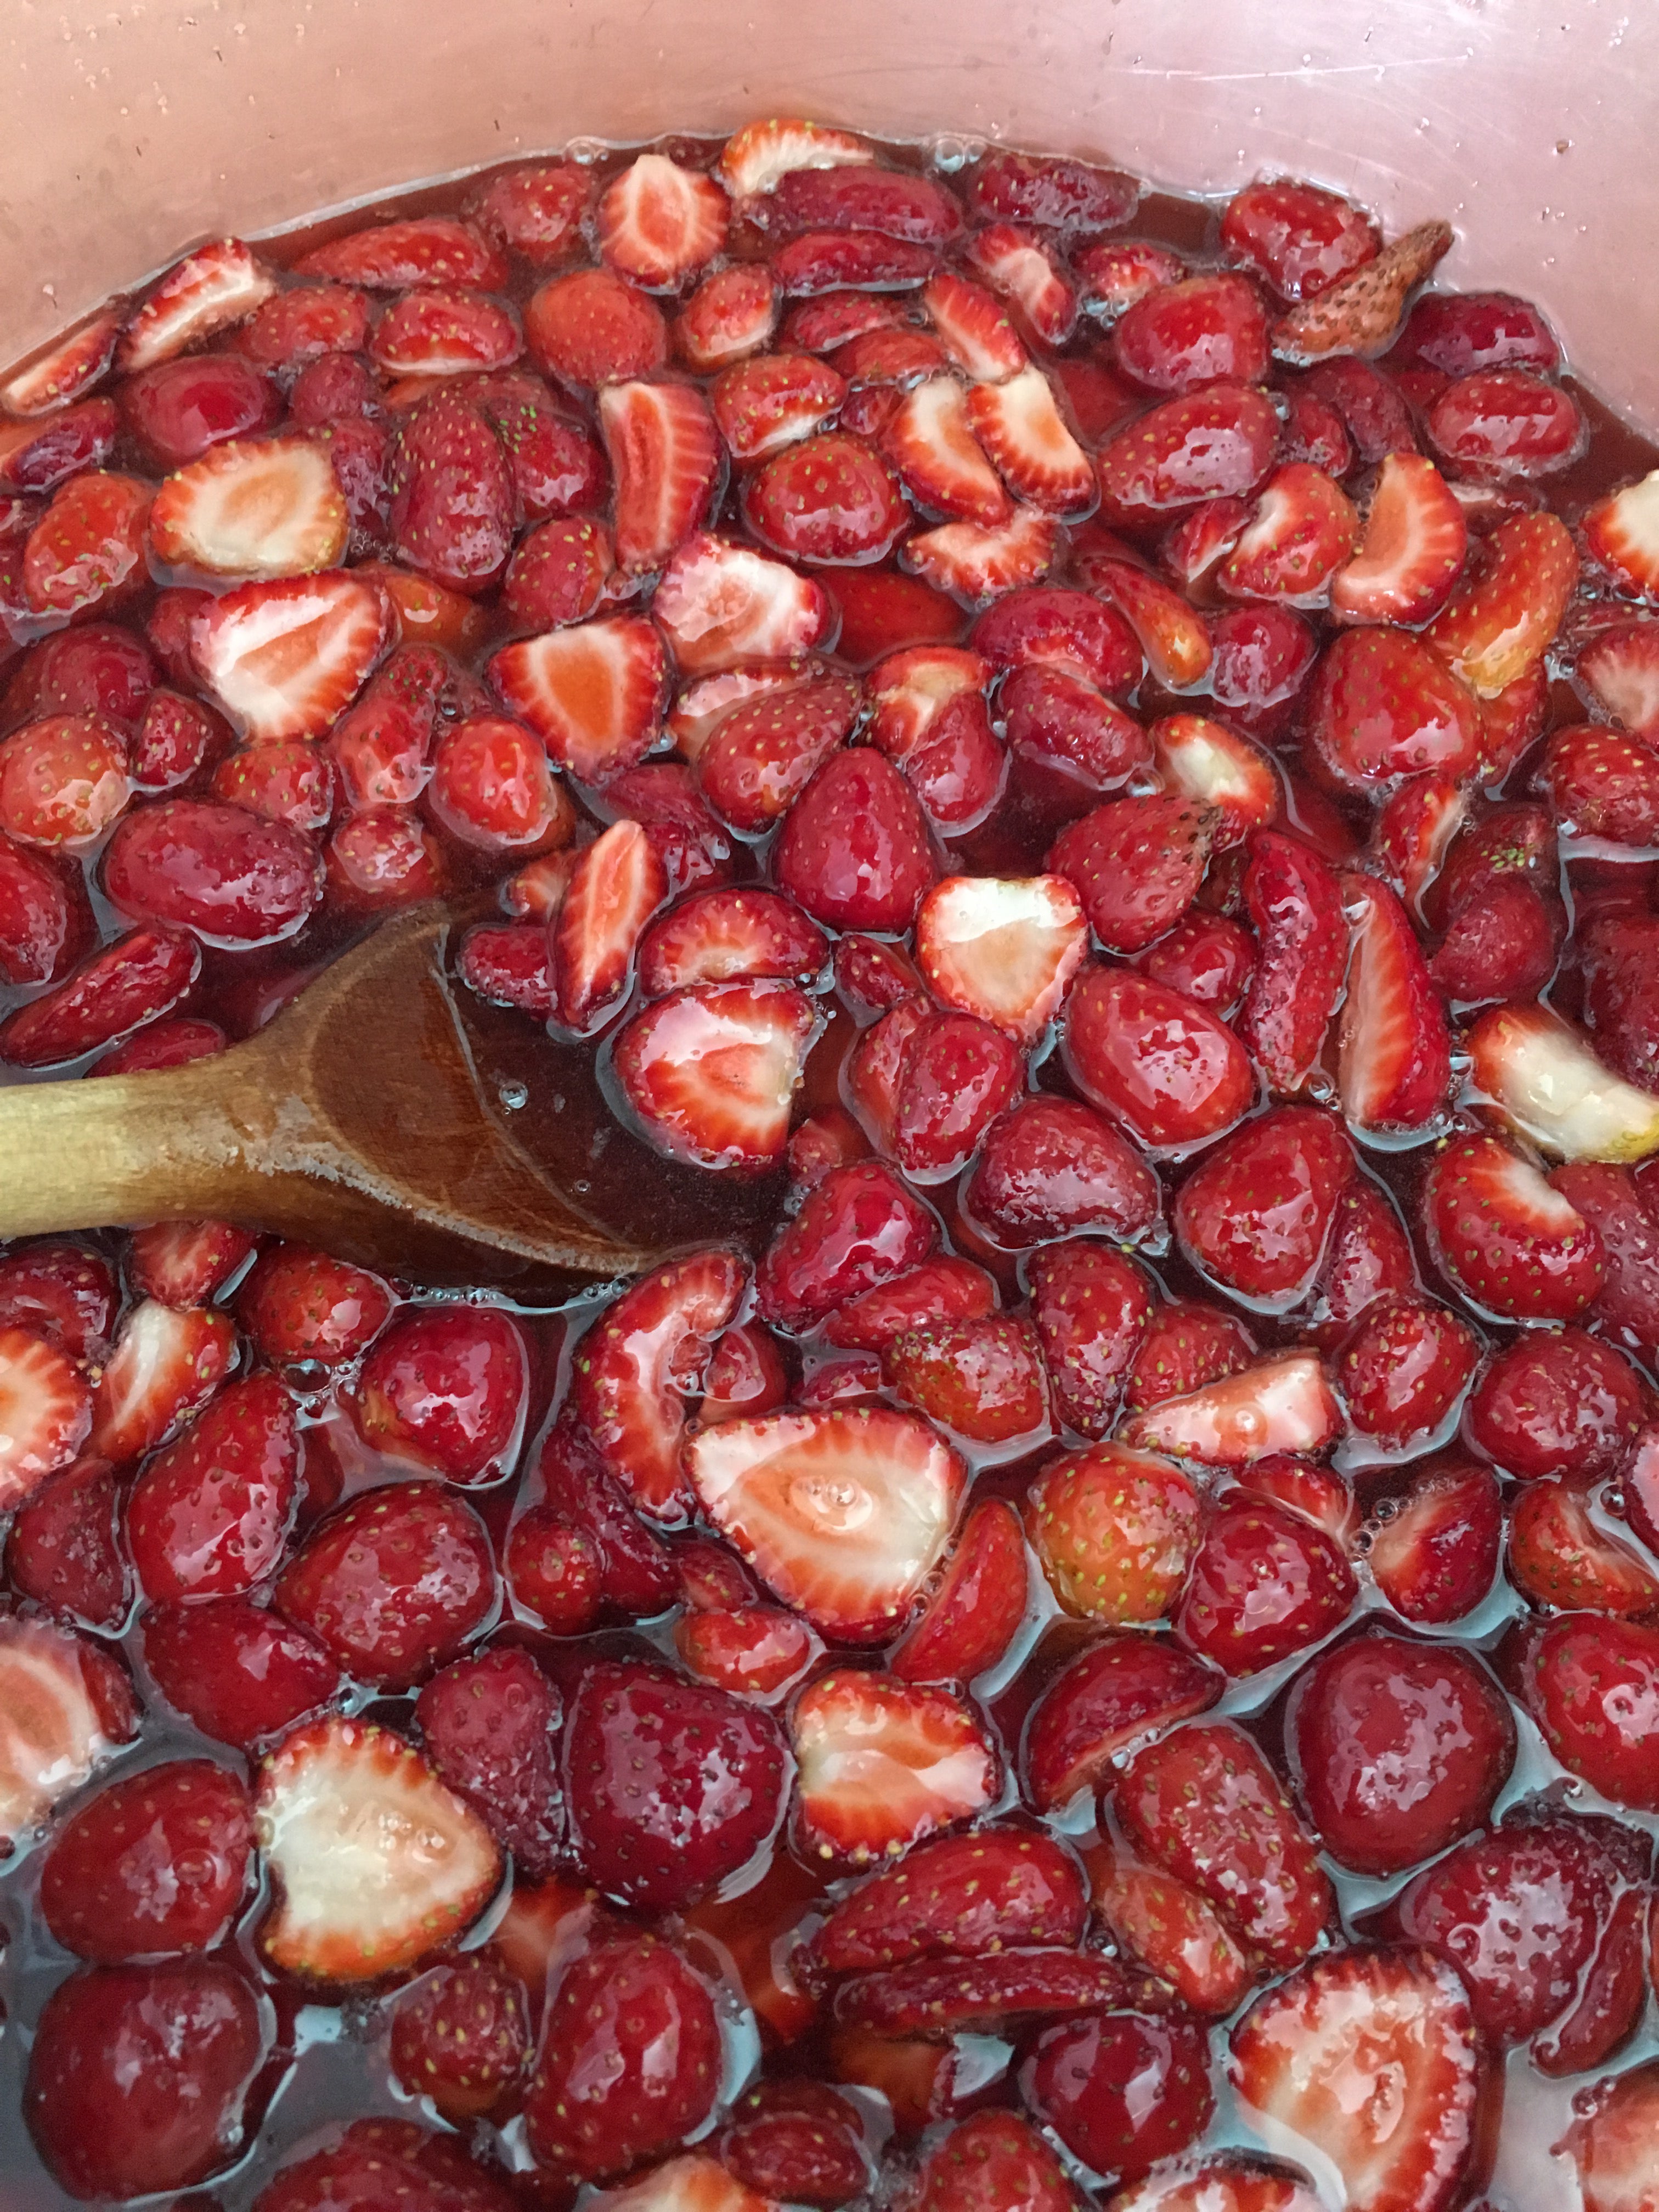 Strawberry jam cooking